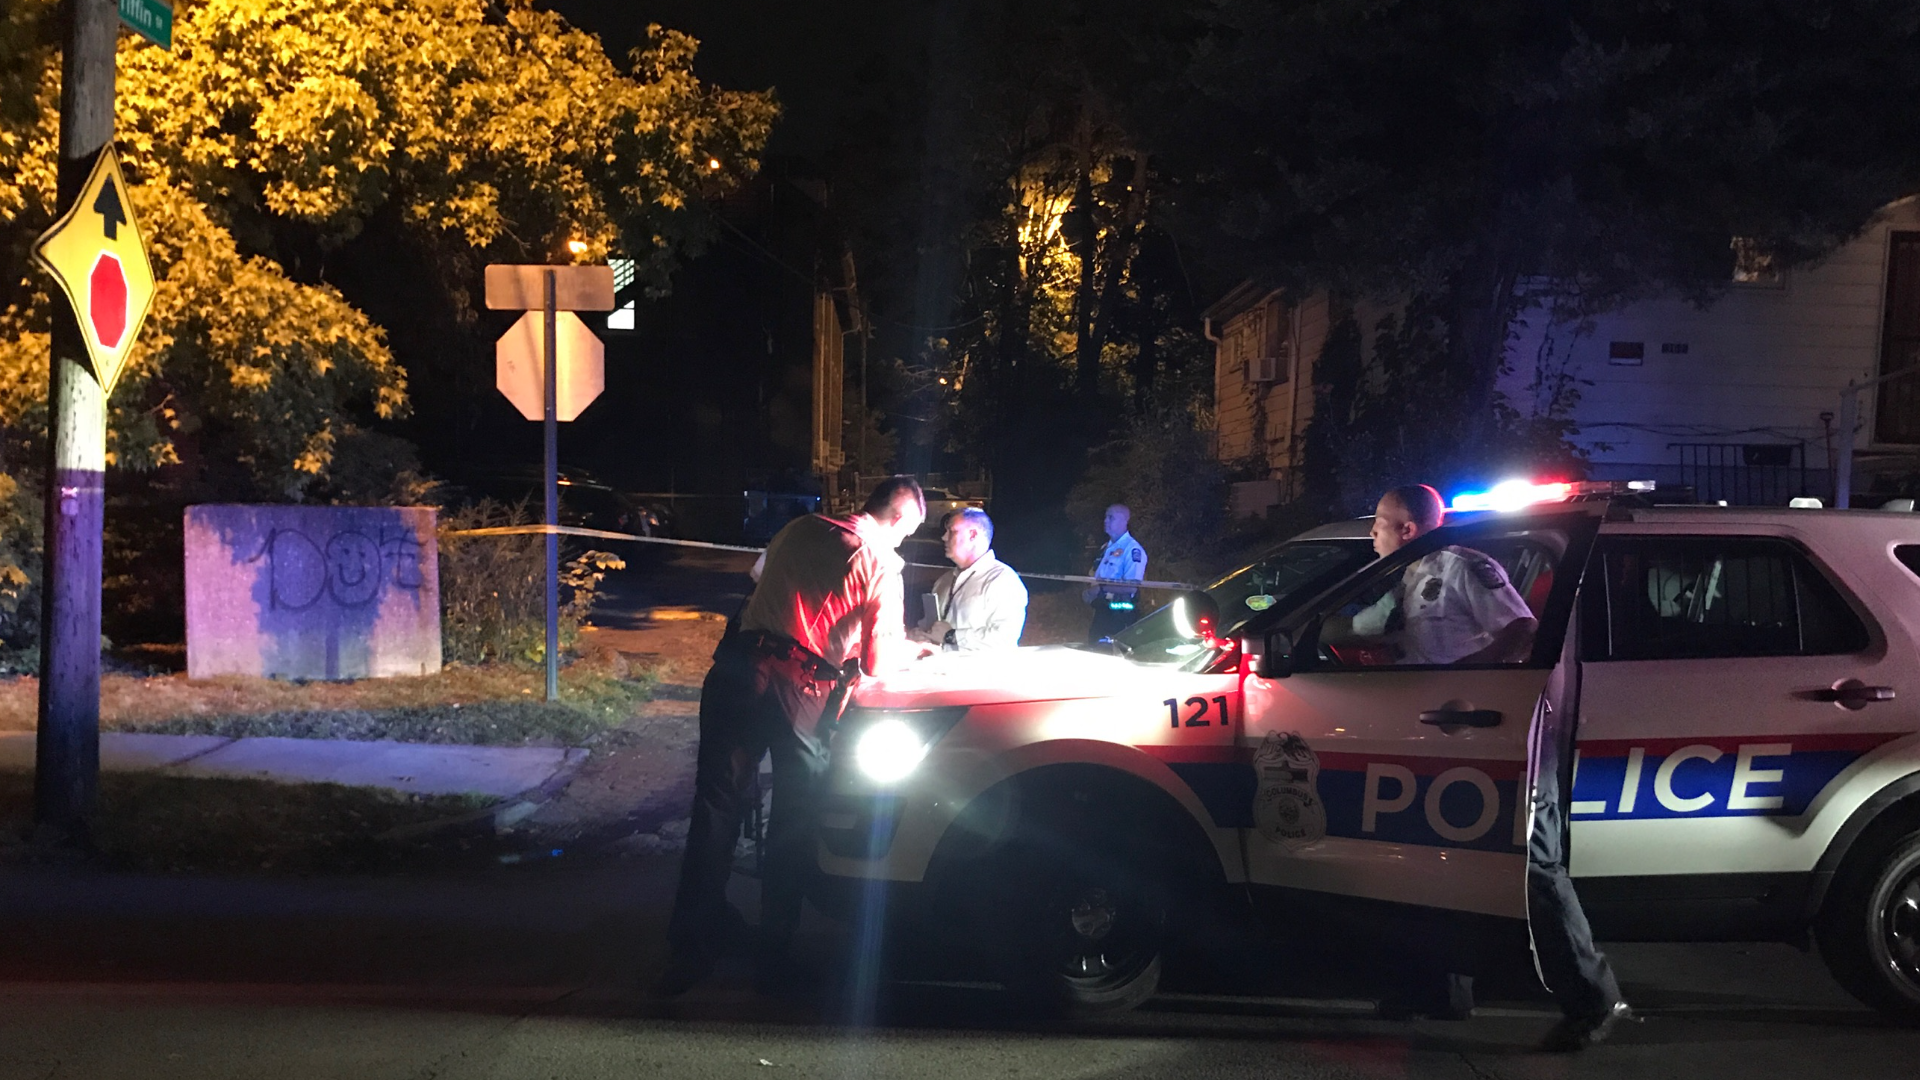 The shooting happened inside an apartment complex on the 1500 block of Bryden Road just after 11:50 p.m., police said.